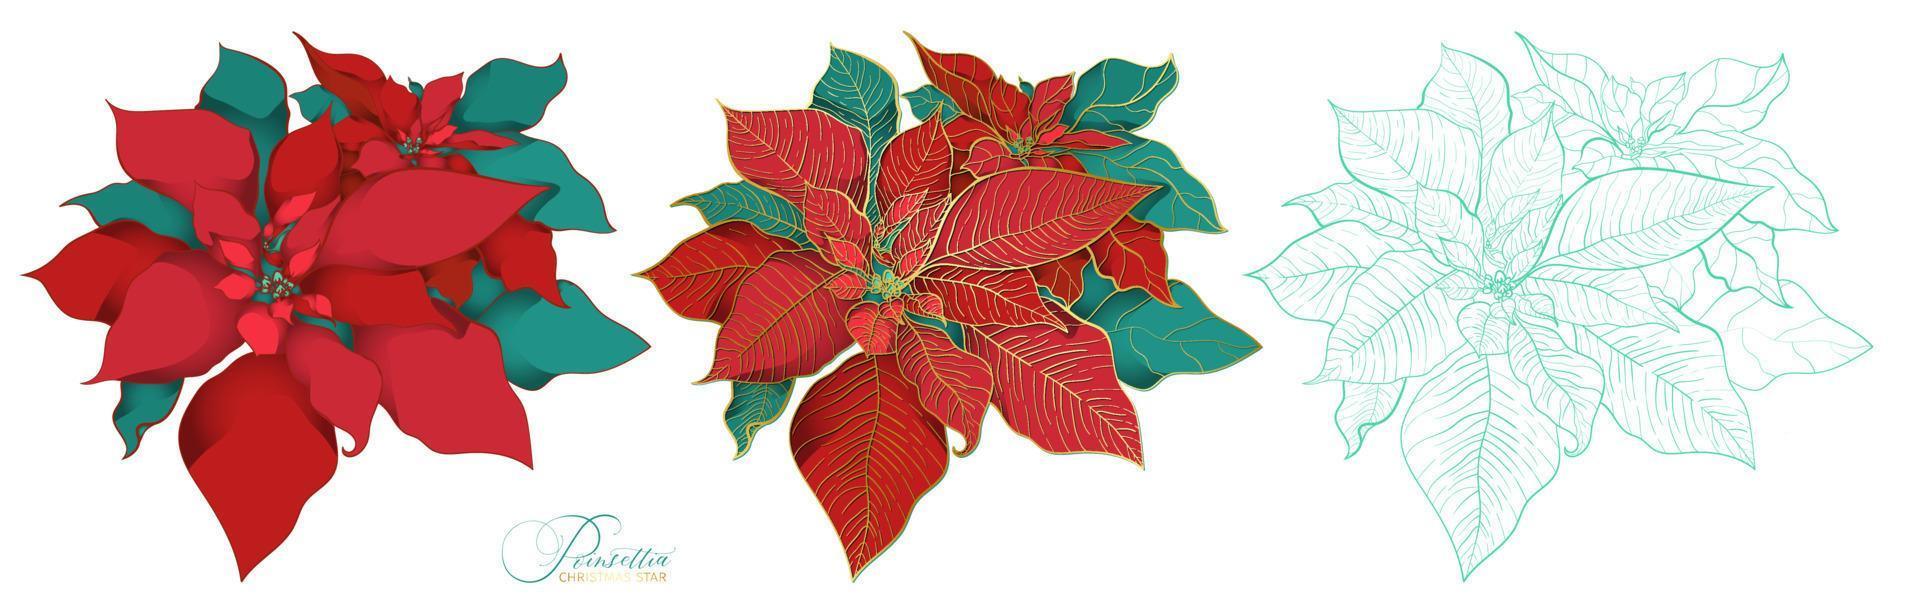 Poinsettia trees in an elegant decorative style vector